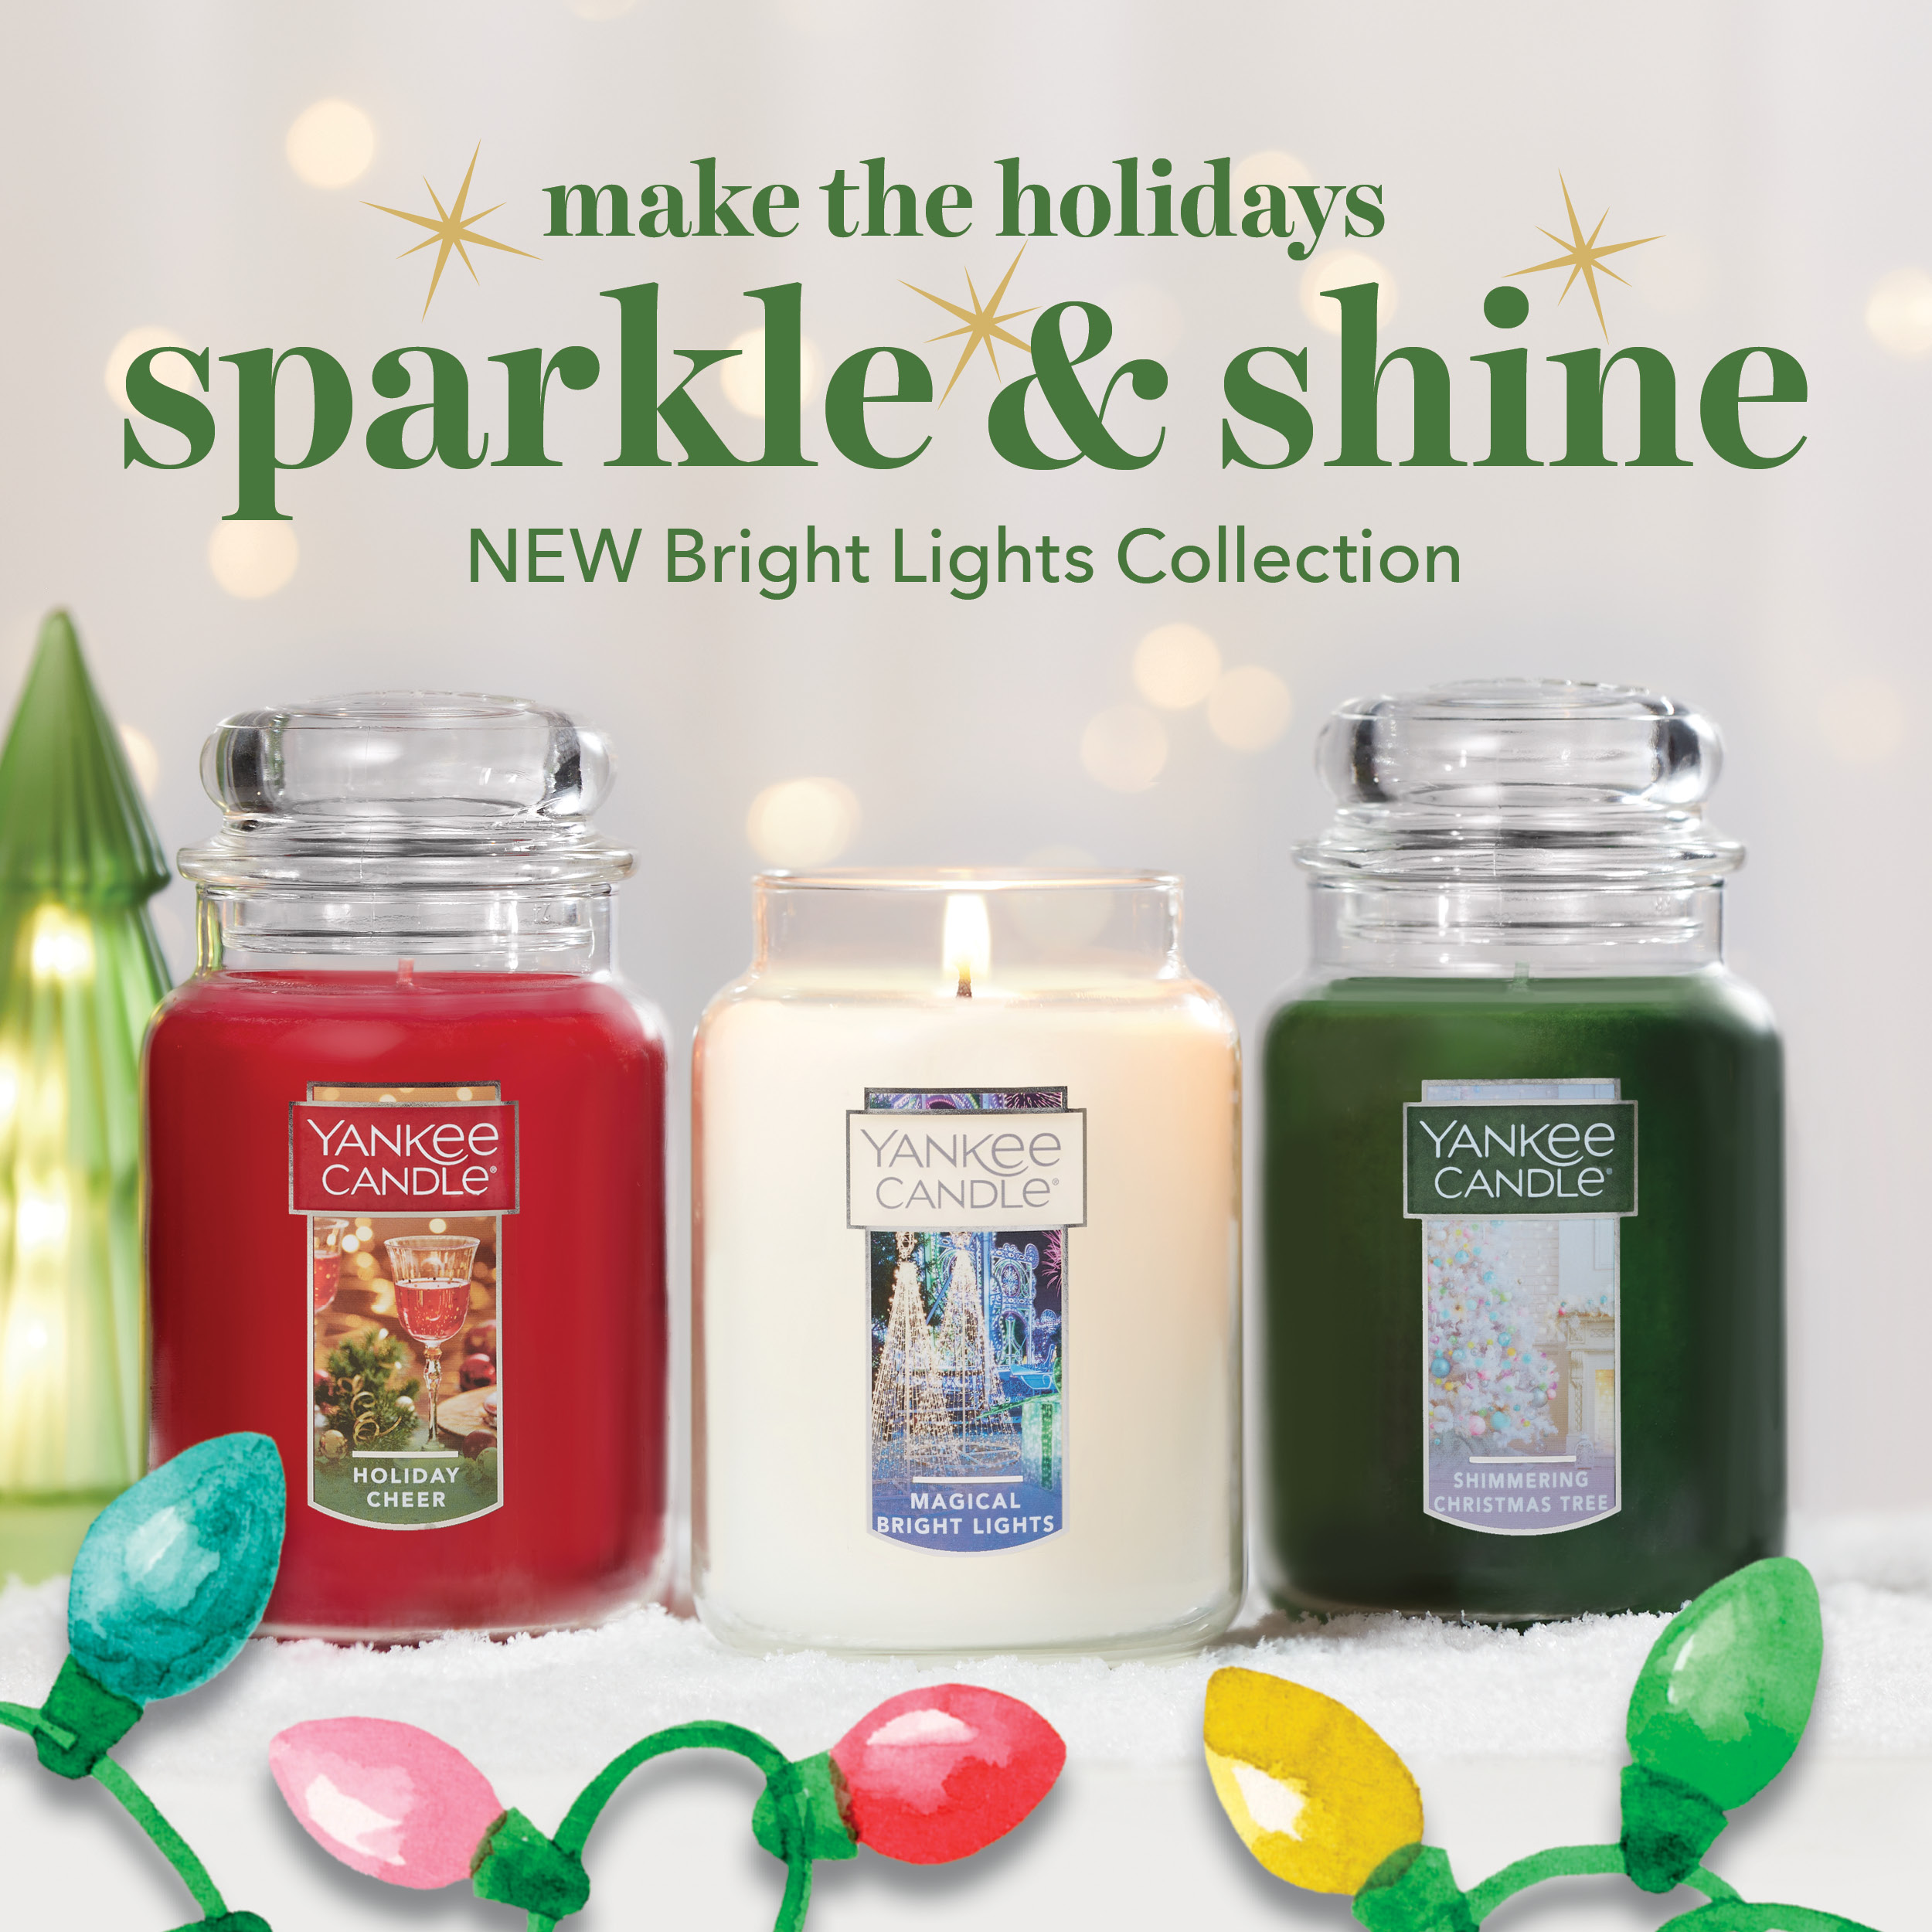 Introducing our NEW Bright Lights Collection